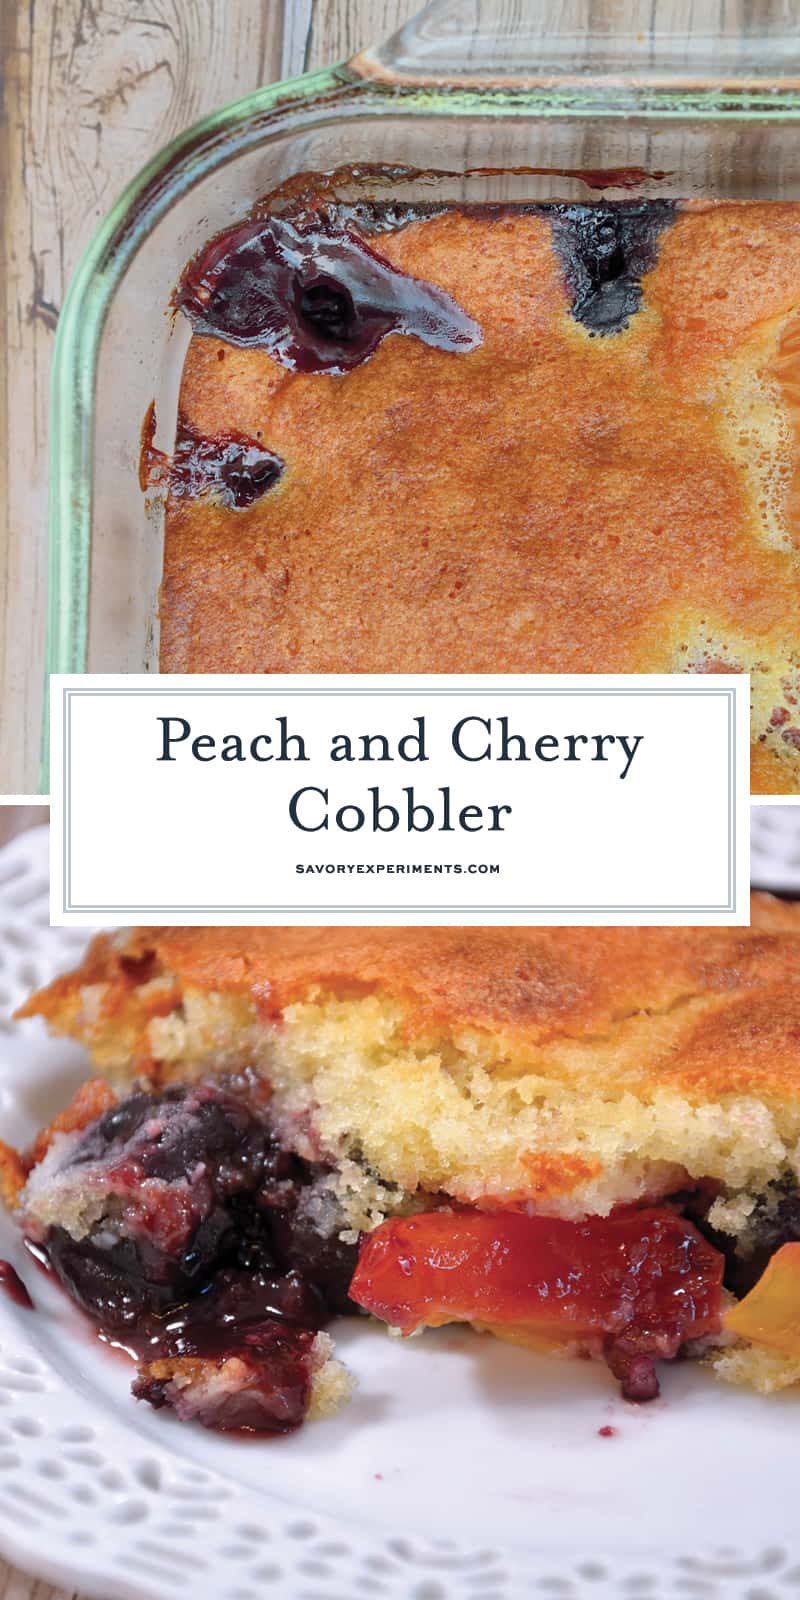 Peach and Cherry Cobbler is an easy cobbler recipe perfect for brunch or dessert. Serve with a scoop of vanilla bean ice cream!  #cobblerrecipe #homemadecobbler www.savoryexperiments.com 